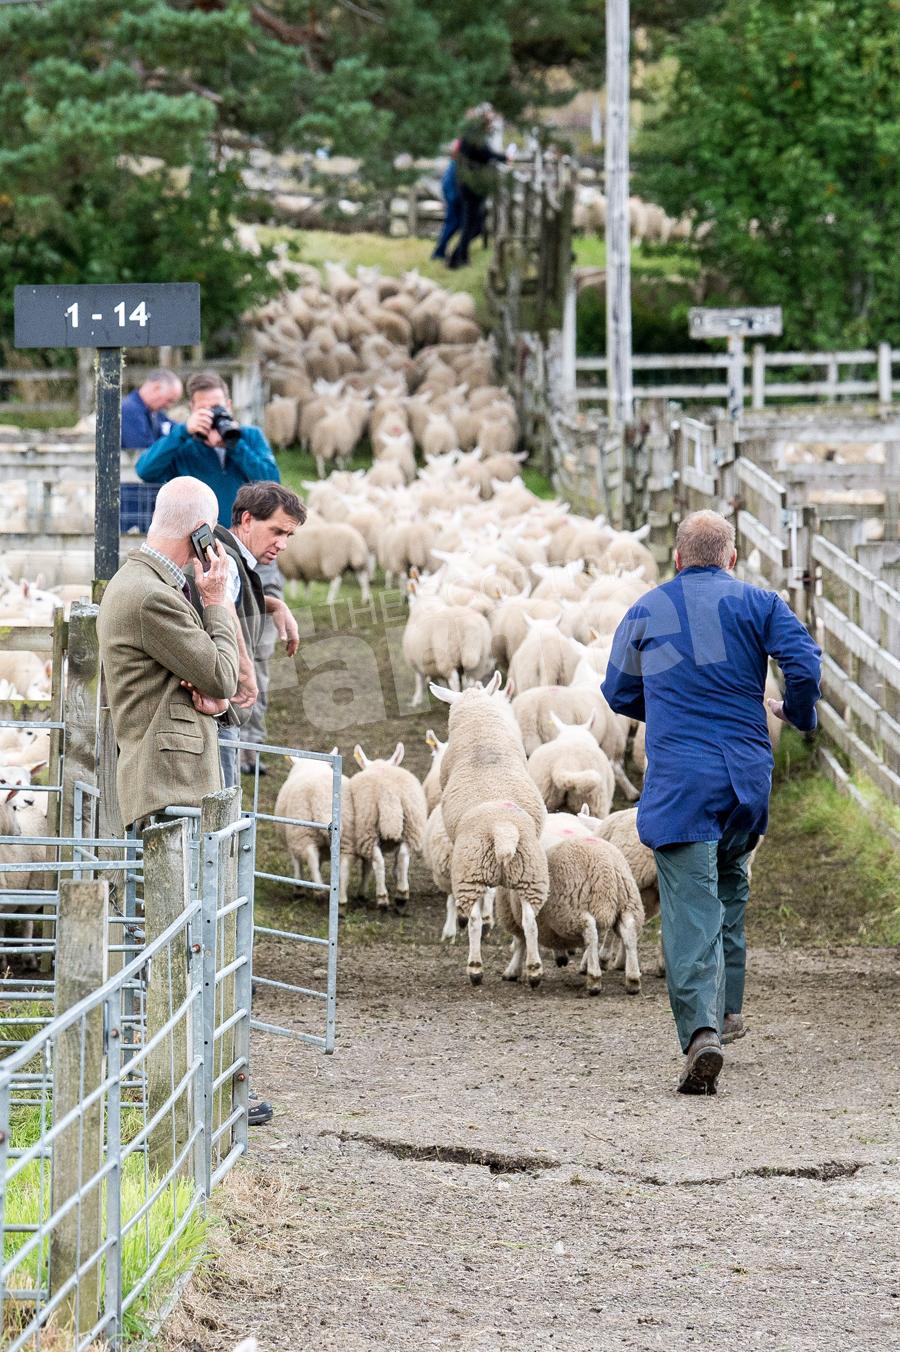 United Auctions staff busy penning back the sheep after they were sold. Ref: RH15817548.